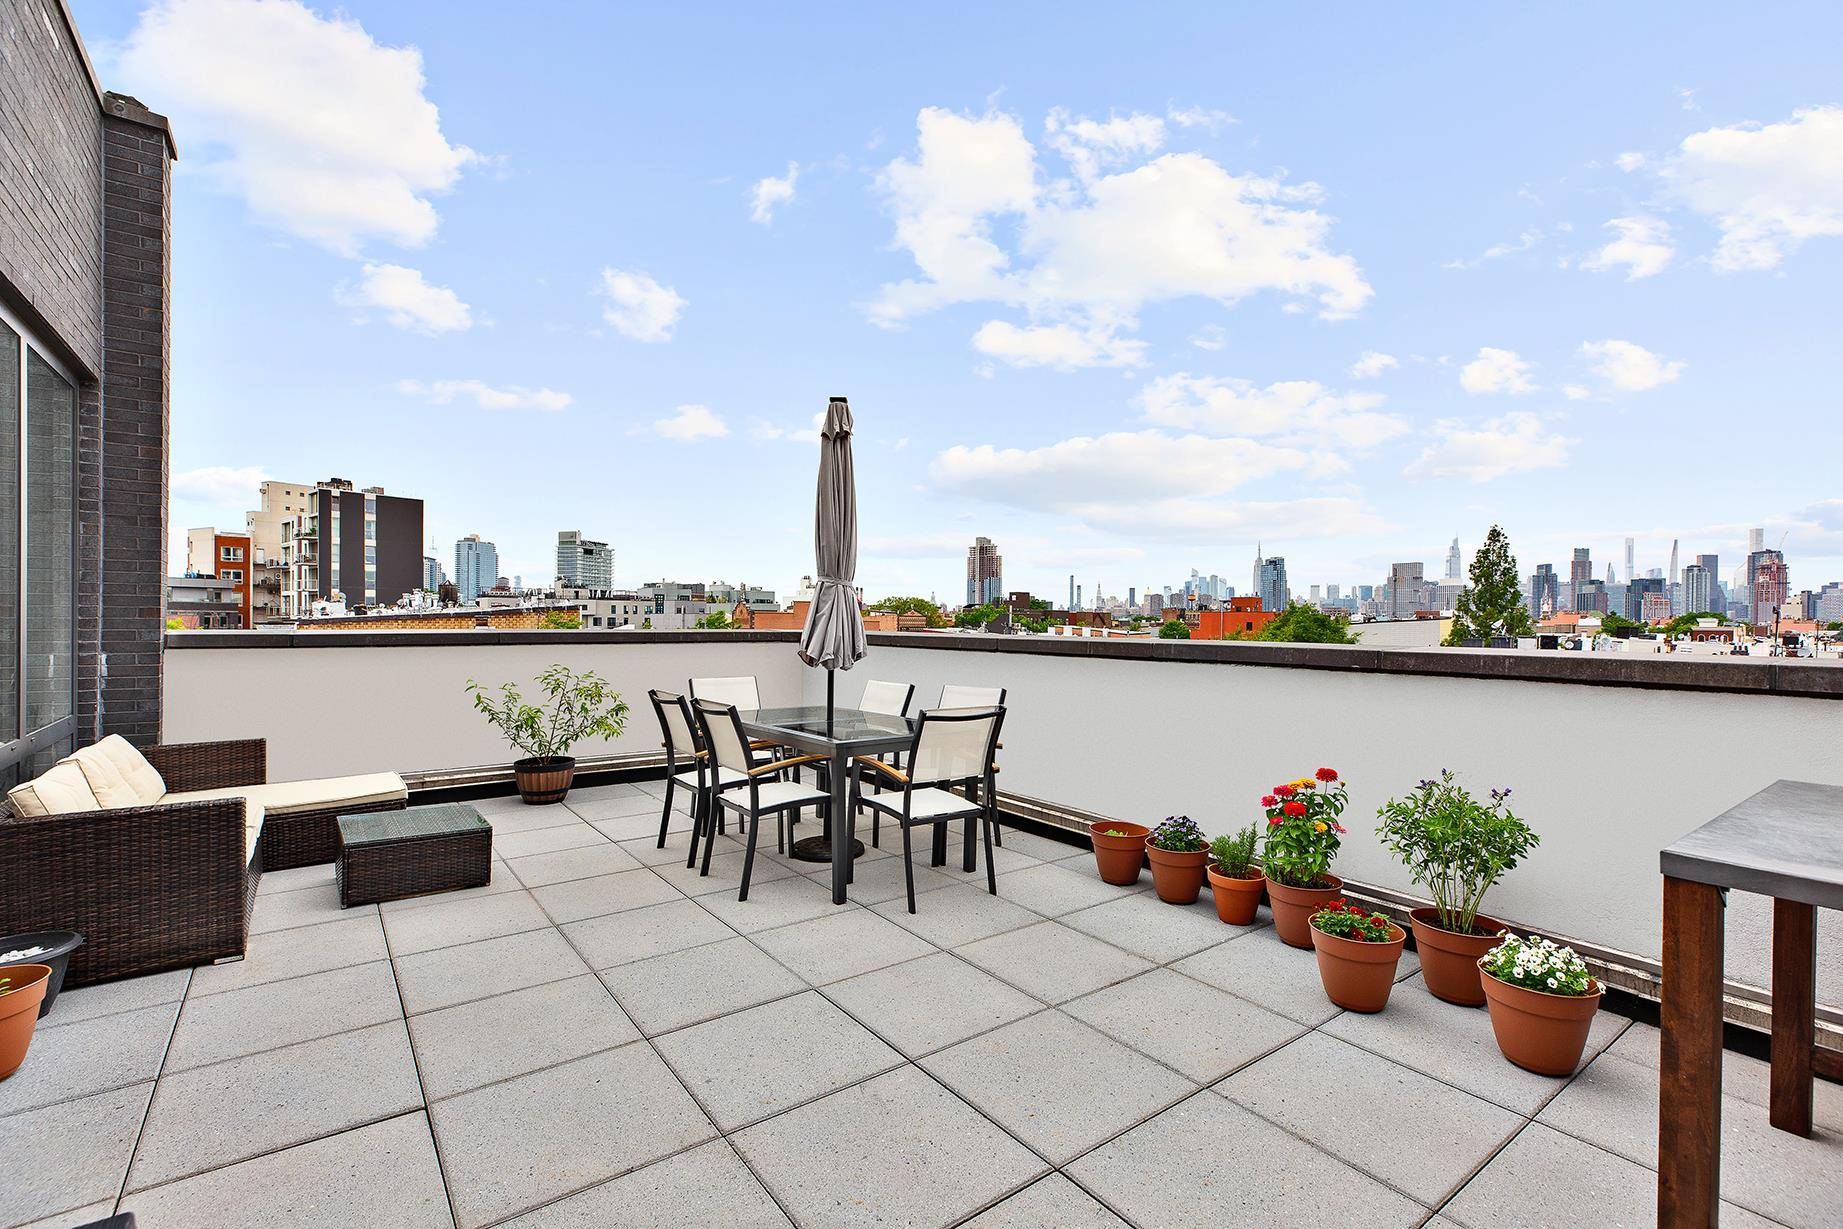 Located in the heart of Williamsburg Greenpoint Brooklyn, Penthouse 5C at 247 Driggs is not to miss.